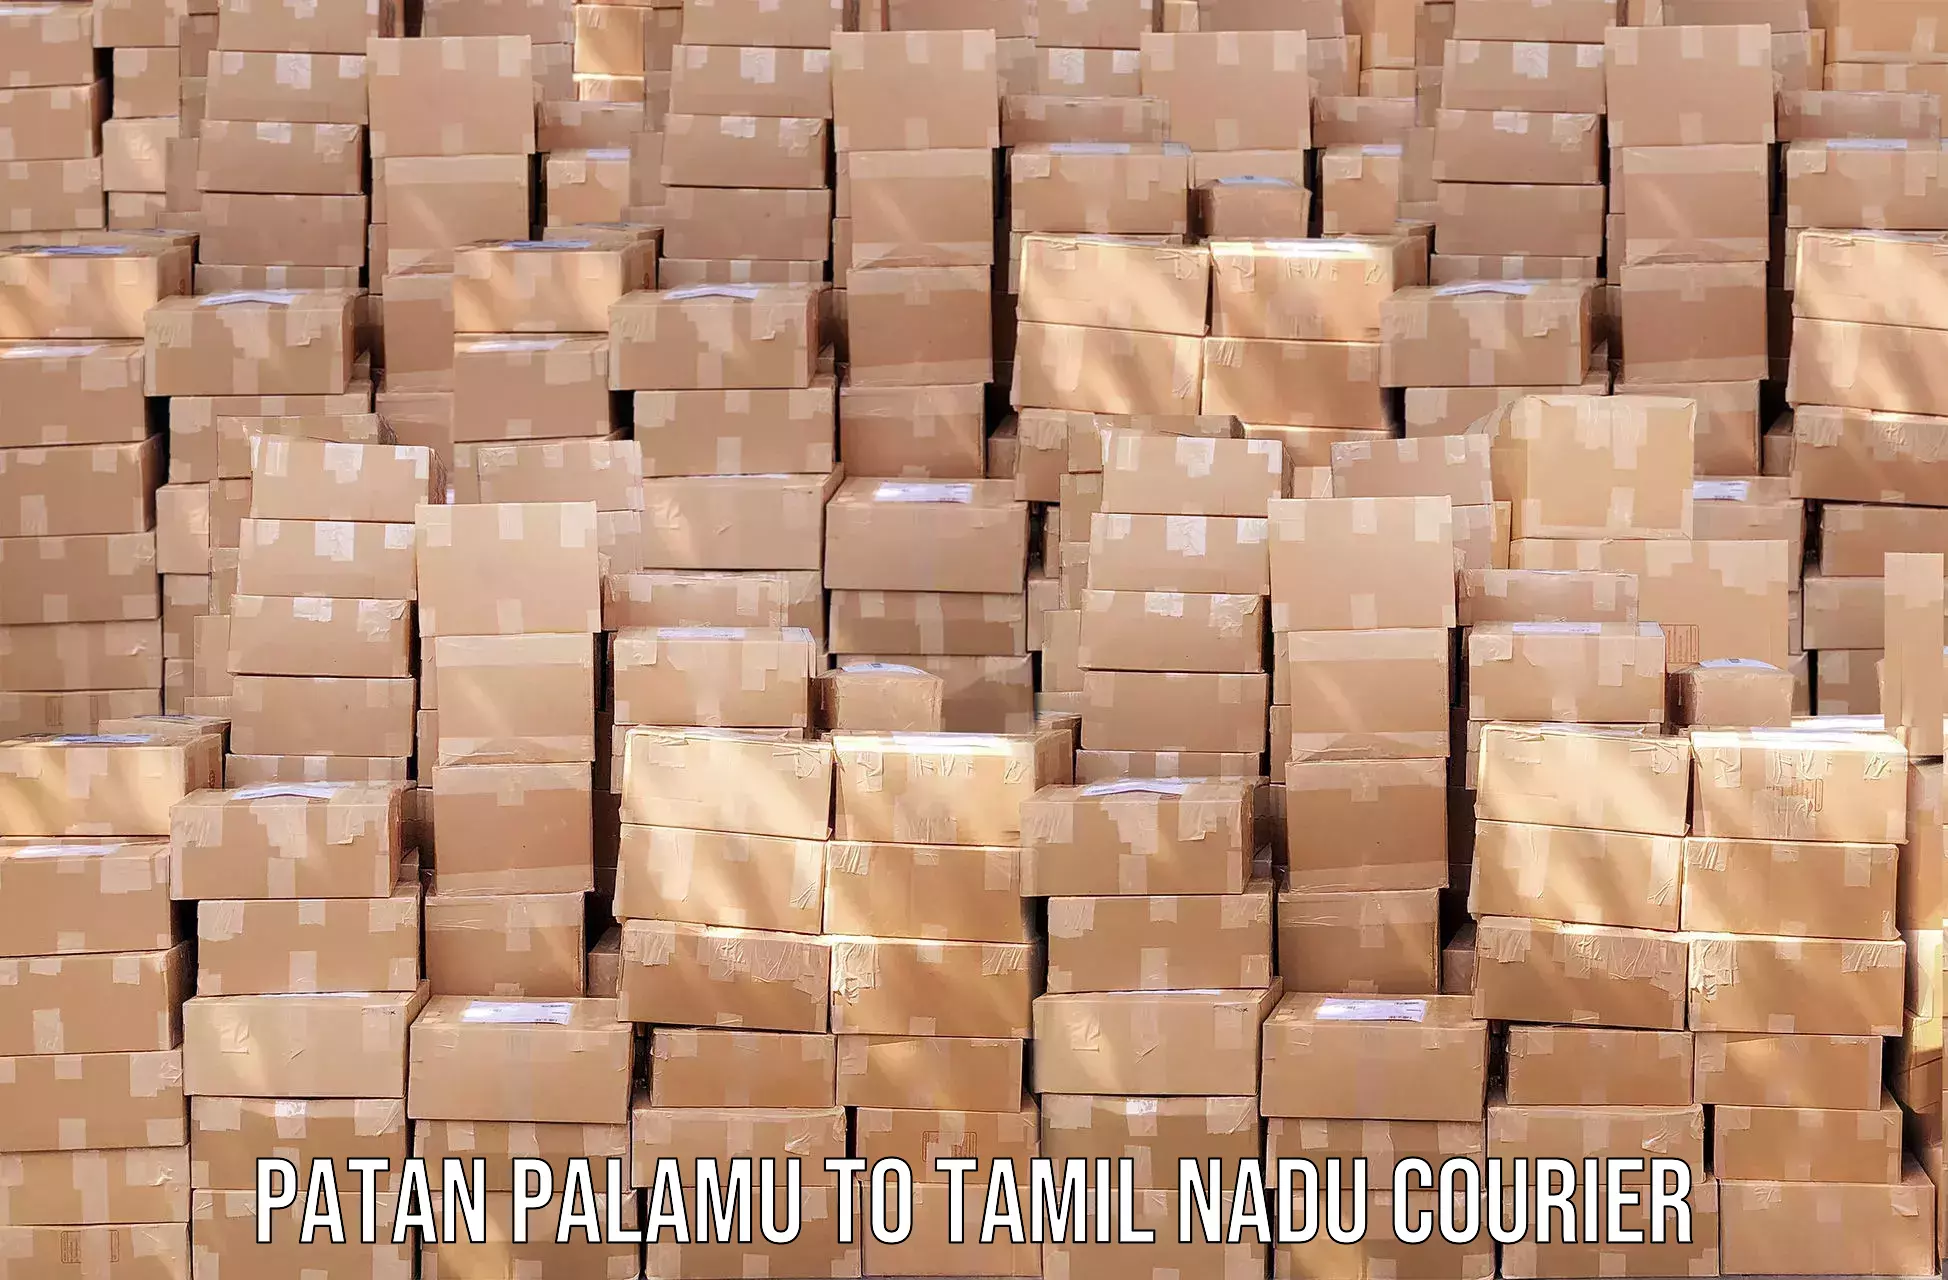 State-of-the-art courier technology Patan Palamu to Tamil Nadu